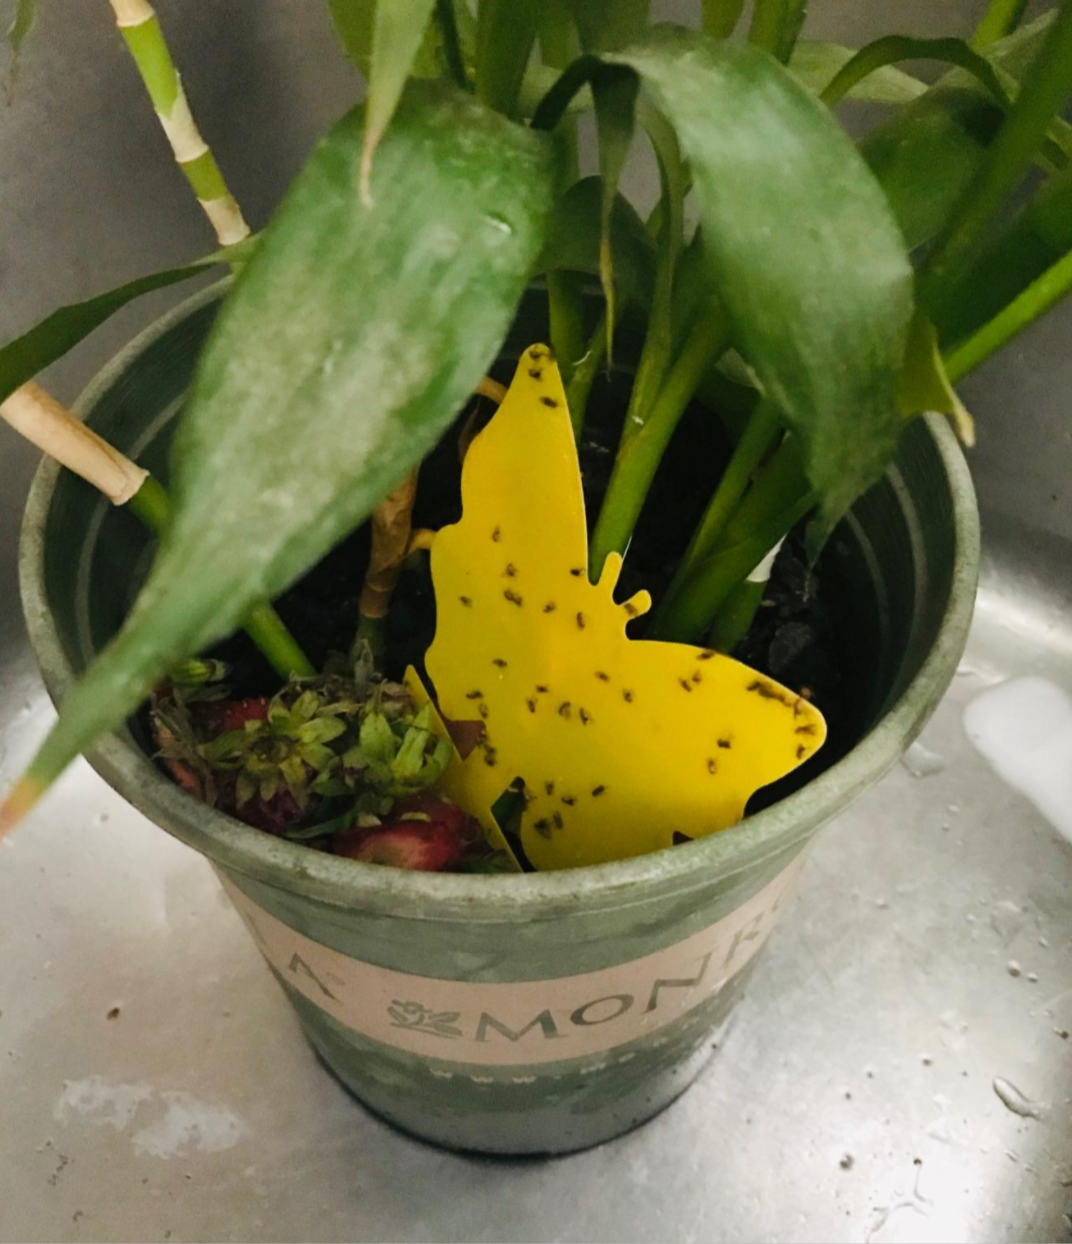 A yellow butterfly shaped sticky trap stuck in a potted plant 